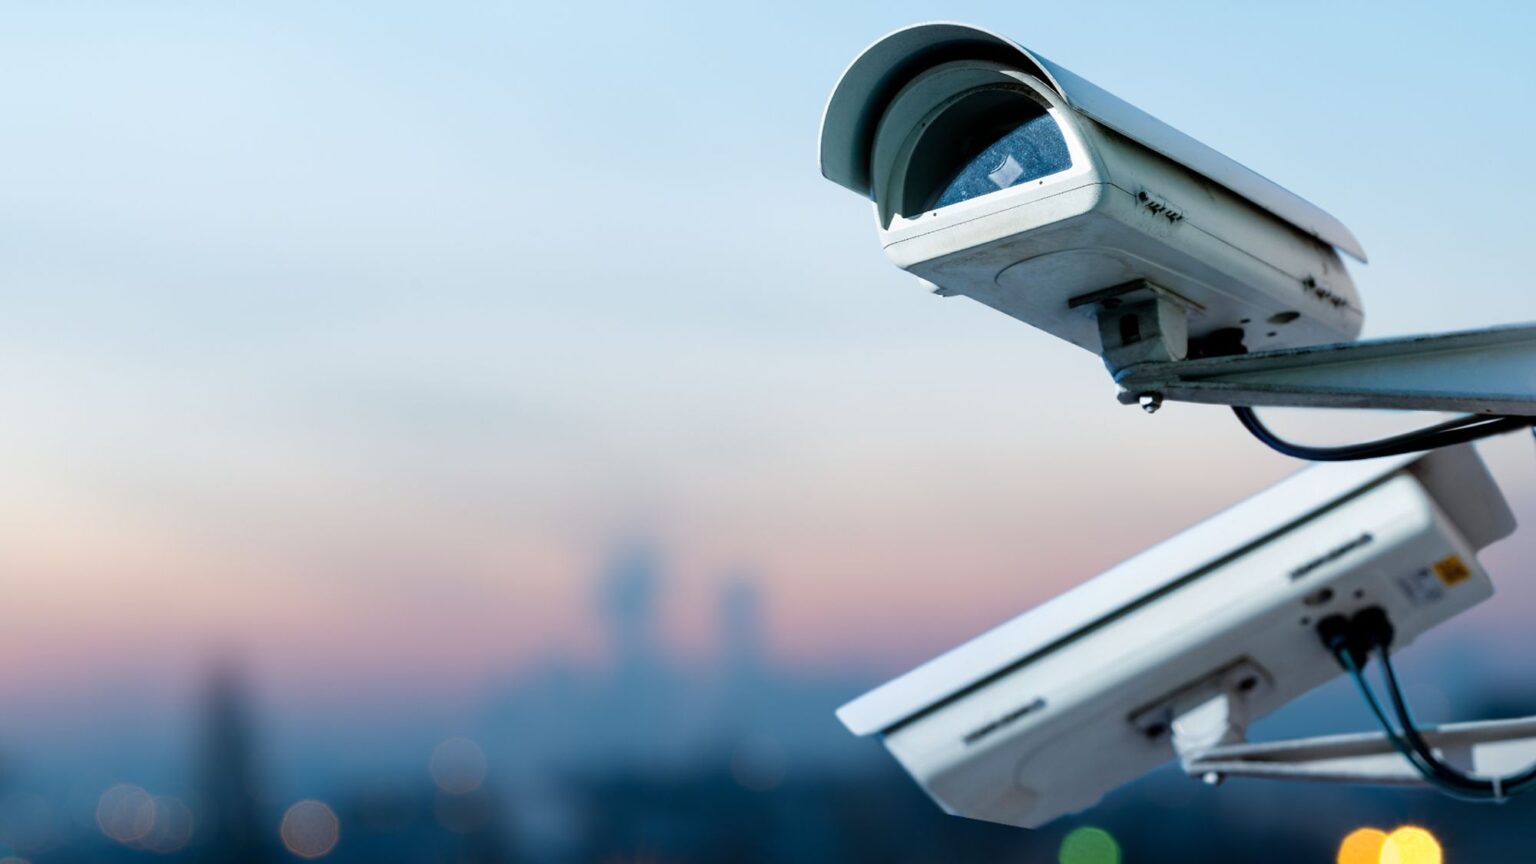 Smart CCTV Cameras monitoring actively on a workplace